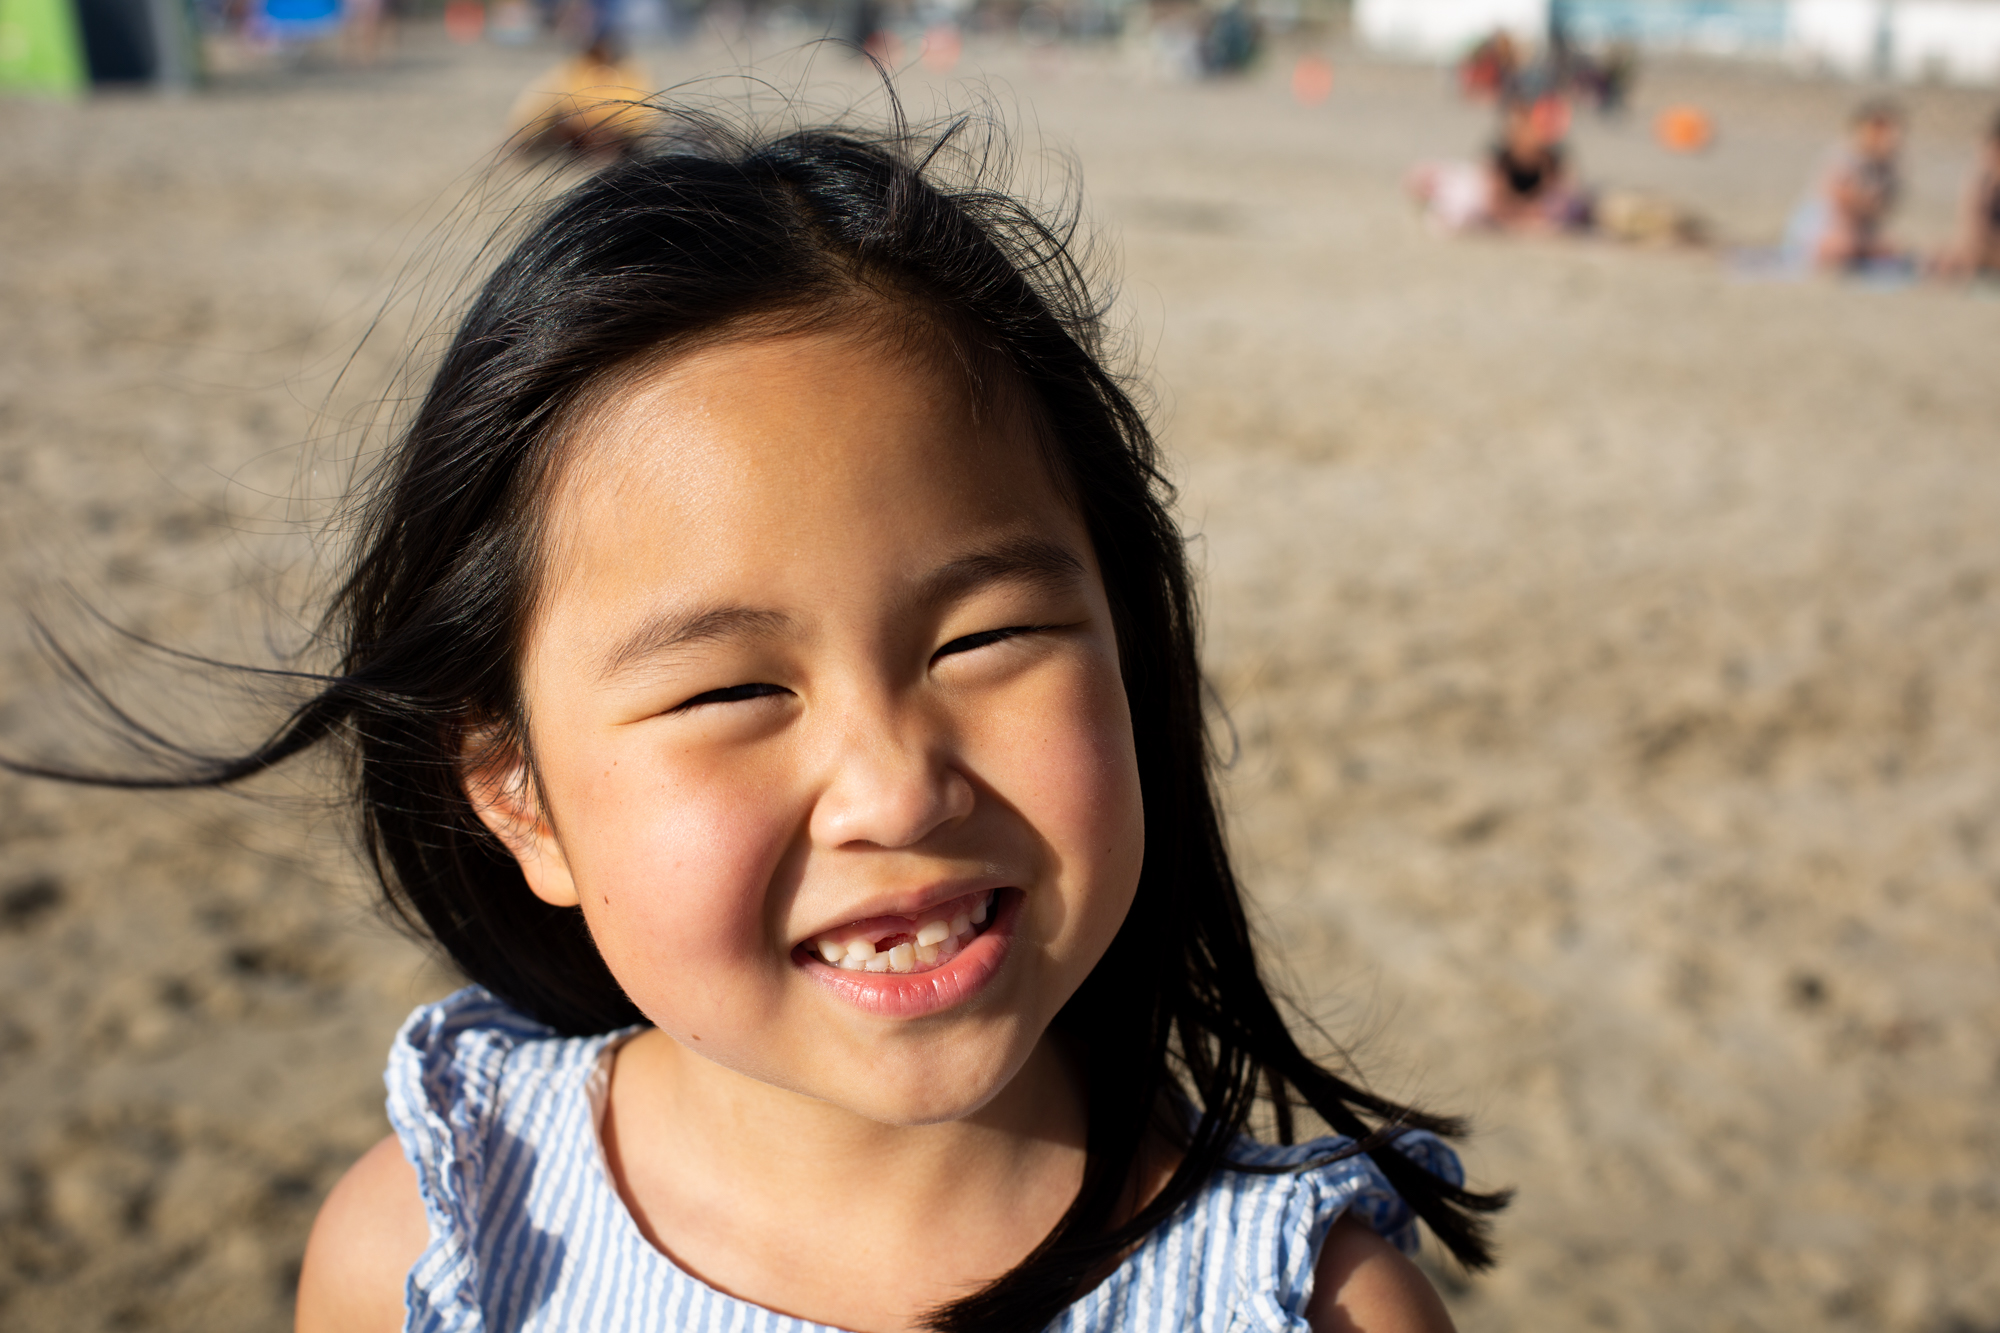 Los Angeles girl at beach missing two front teeth